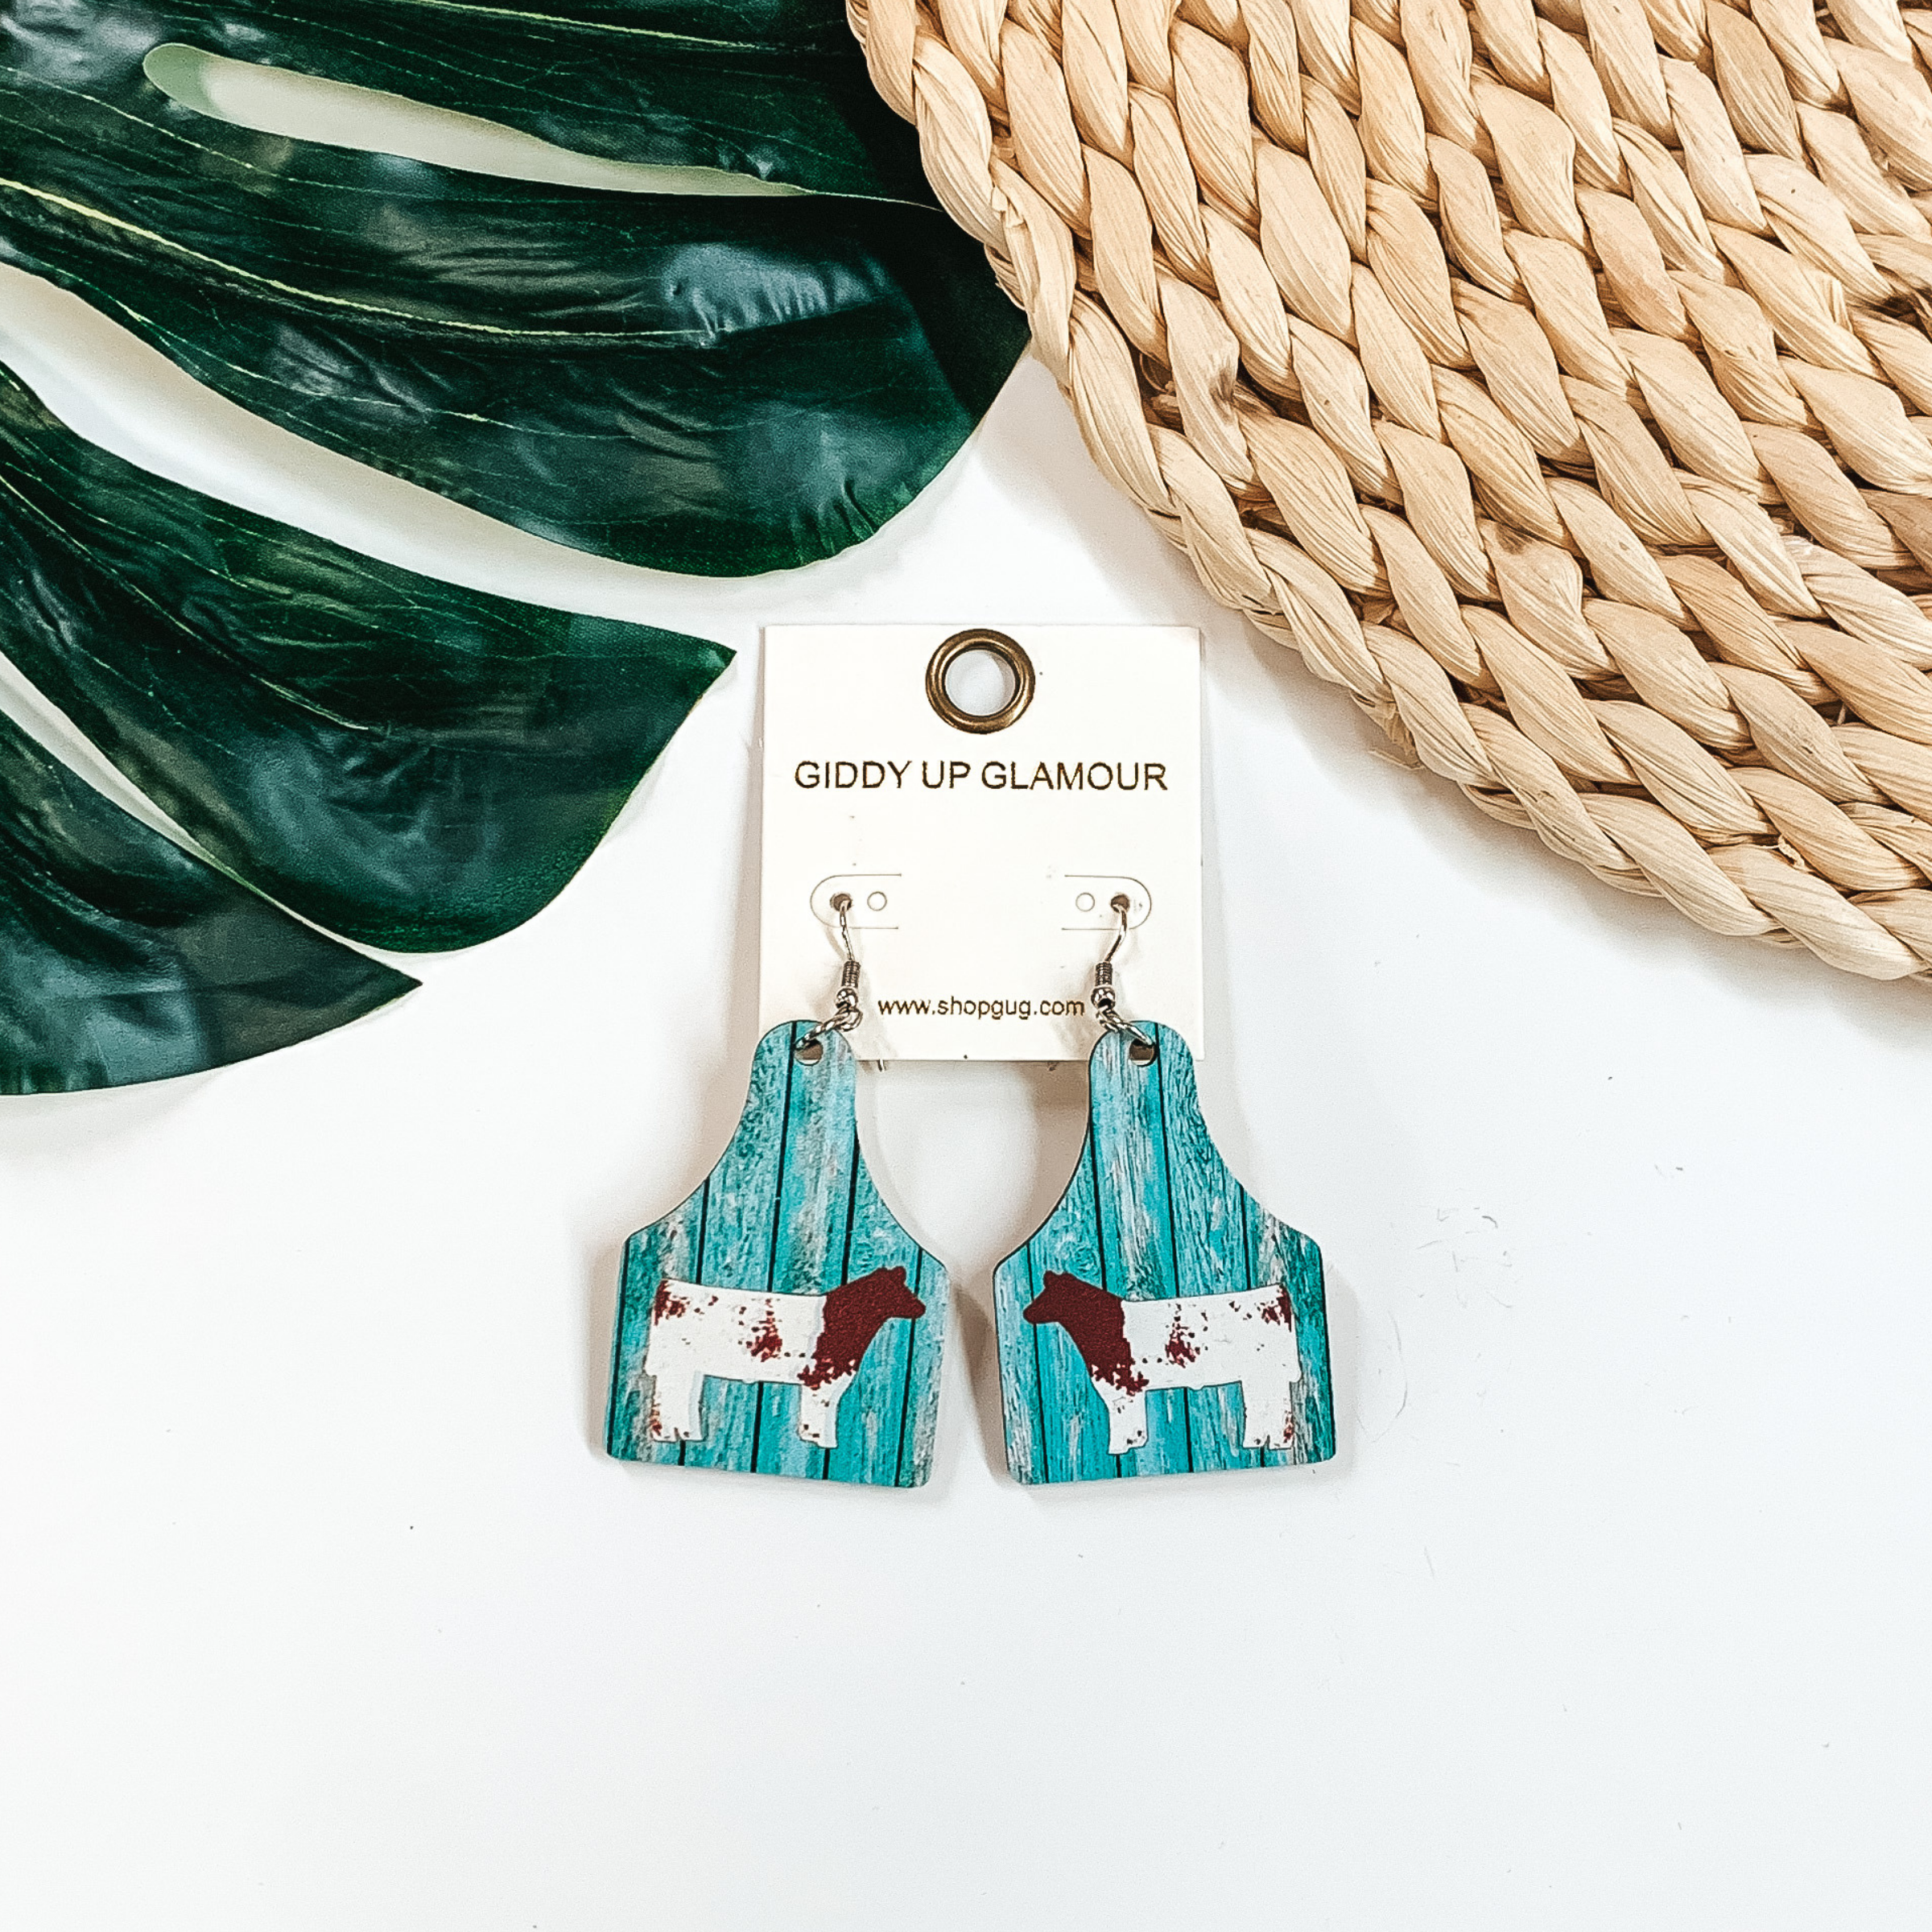 Cattle tag drop earrings with a turquoise wood print. In the center of the earrings is a brown and white cow. These earrings are pictured on a white background with a green leaf and tan basket weave material at the top of the picture. 